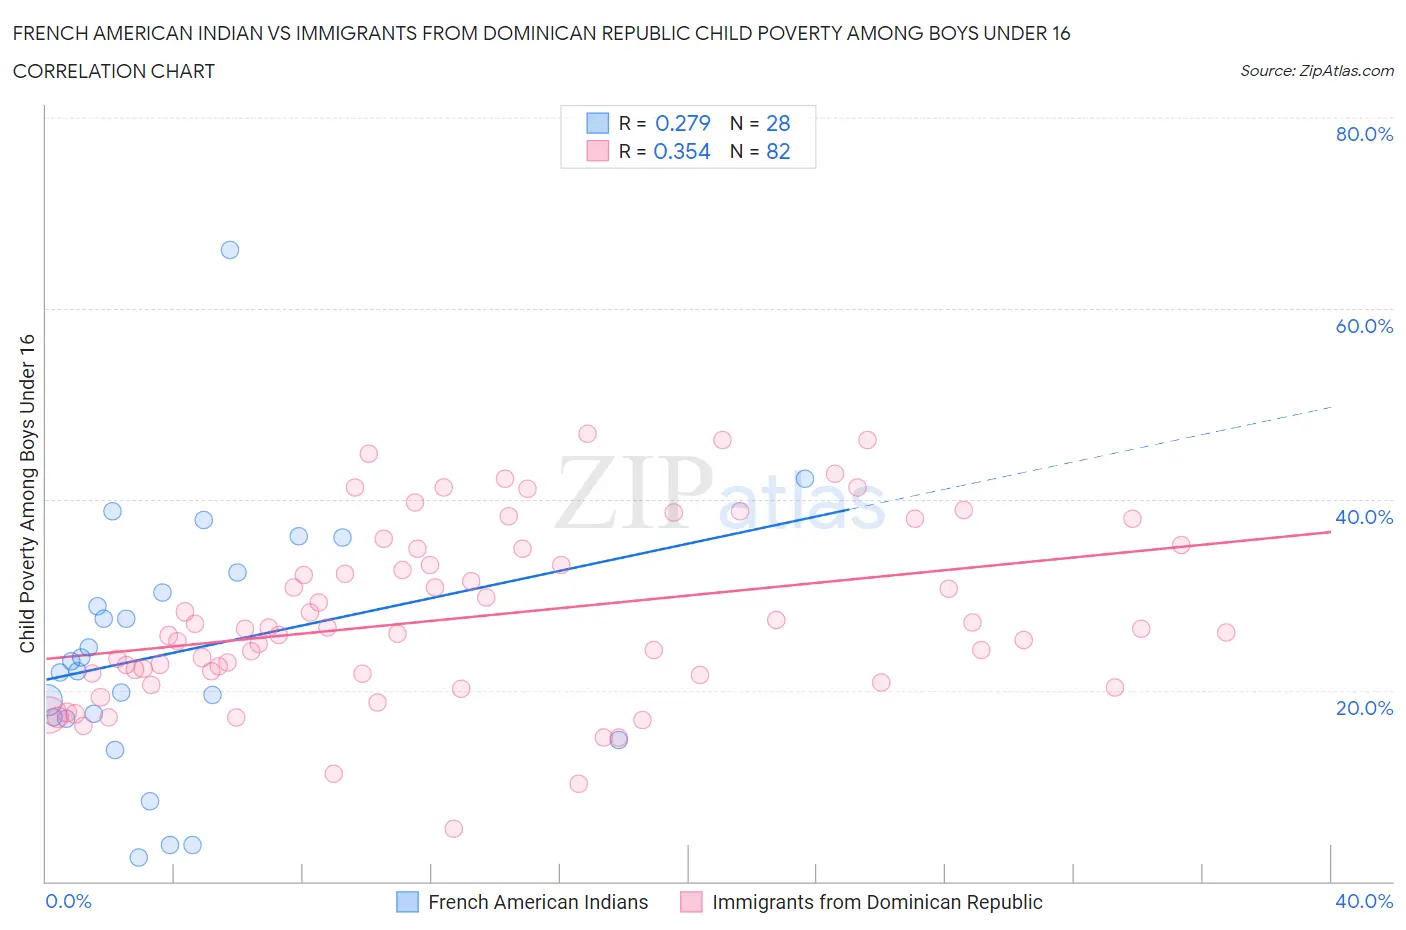 French American Indian vs Immigrants from Dominican Republic Child Poverty Among Boys Under 16